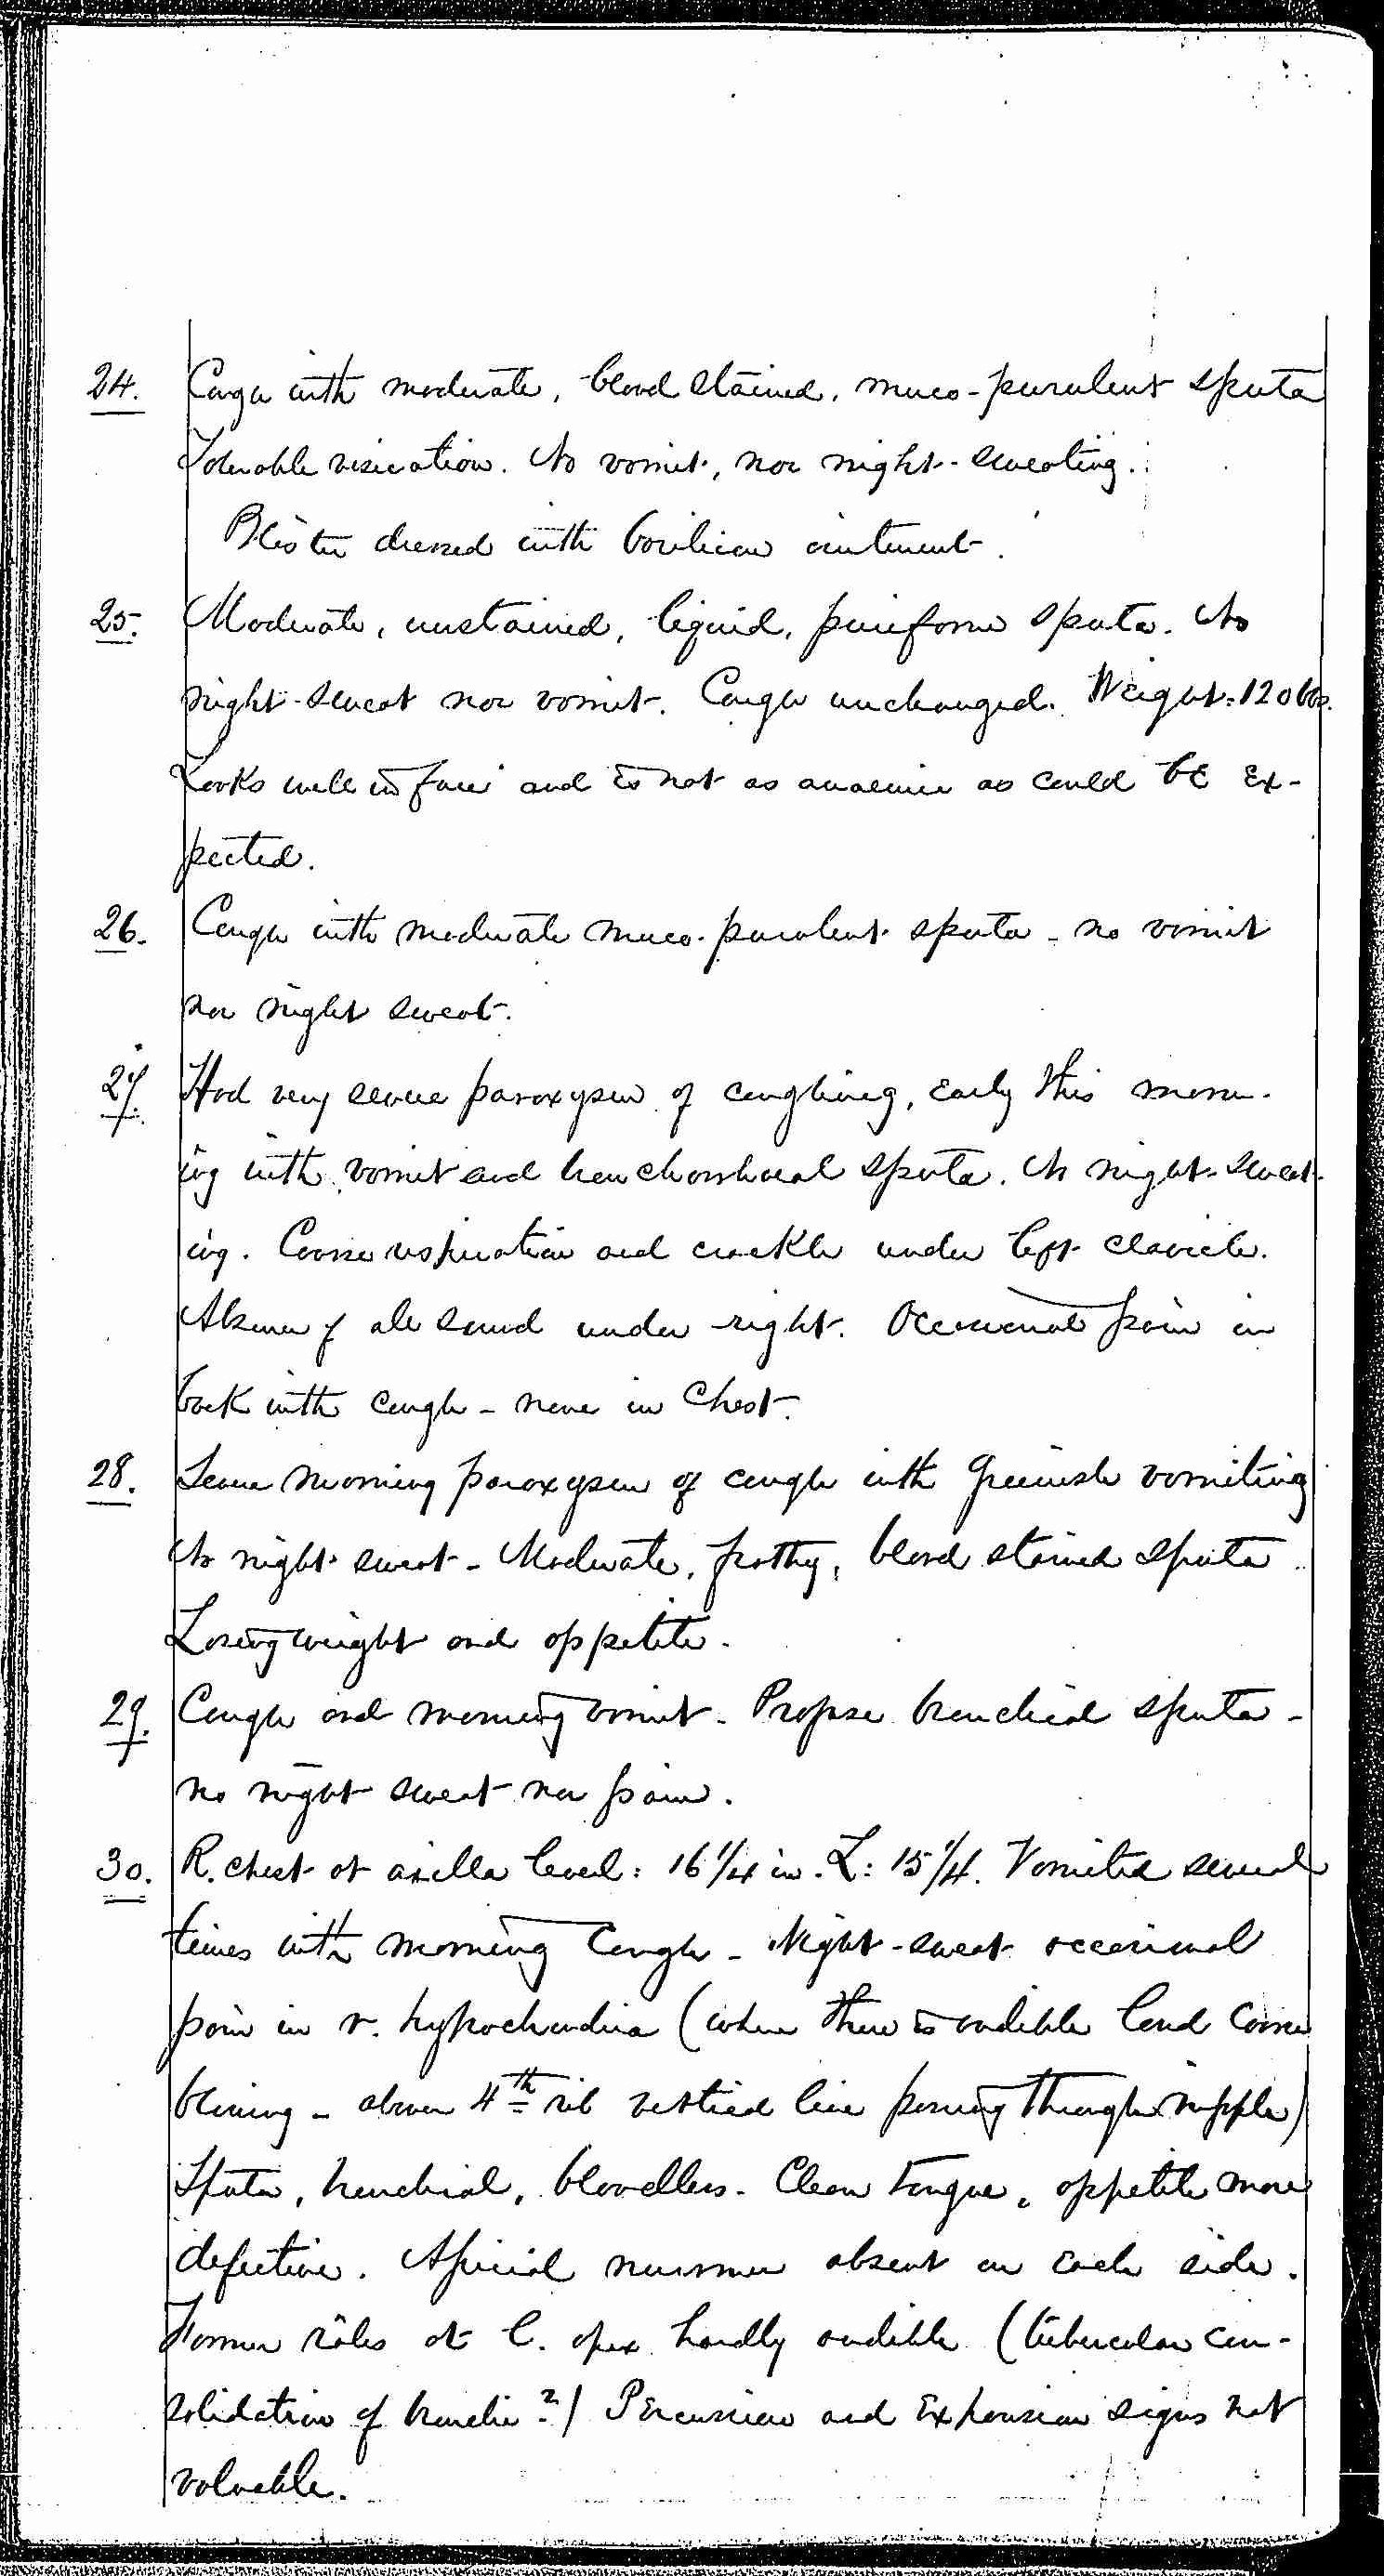 Entry for Hugh Riley (page 16 of 31) in the log Hospital Tickets and Case Papers - Naval Hospital - Washington, D.C. - 1868-69